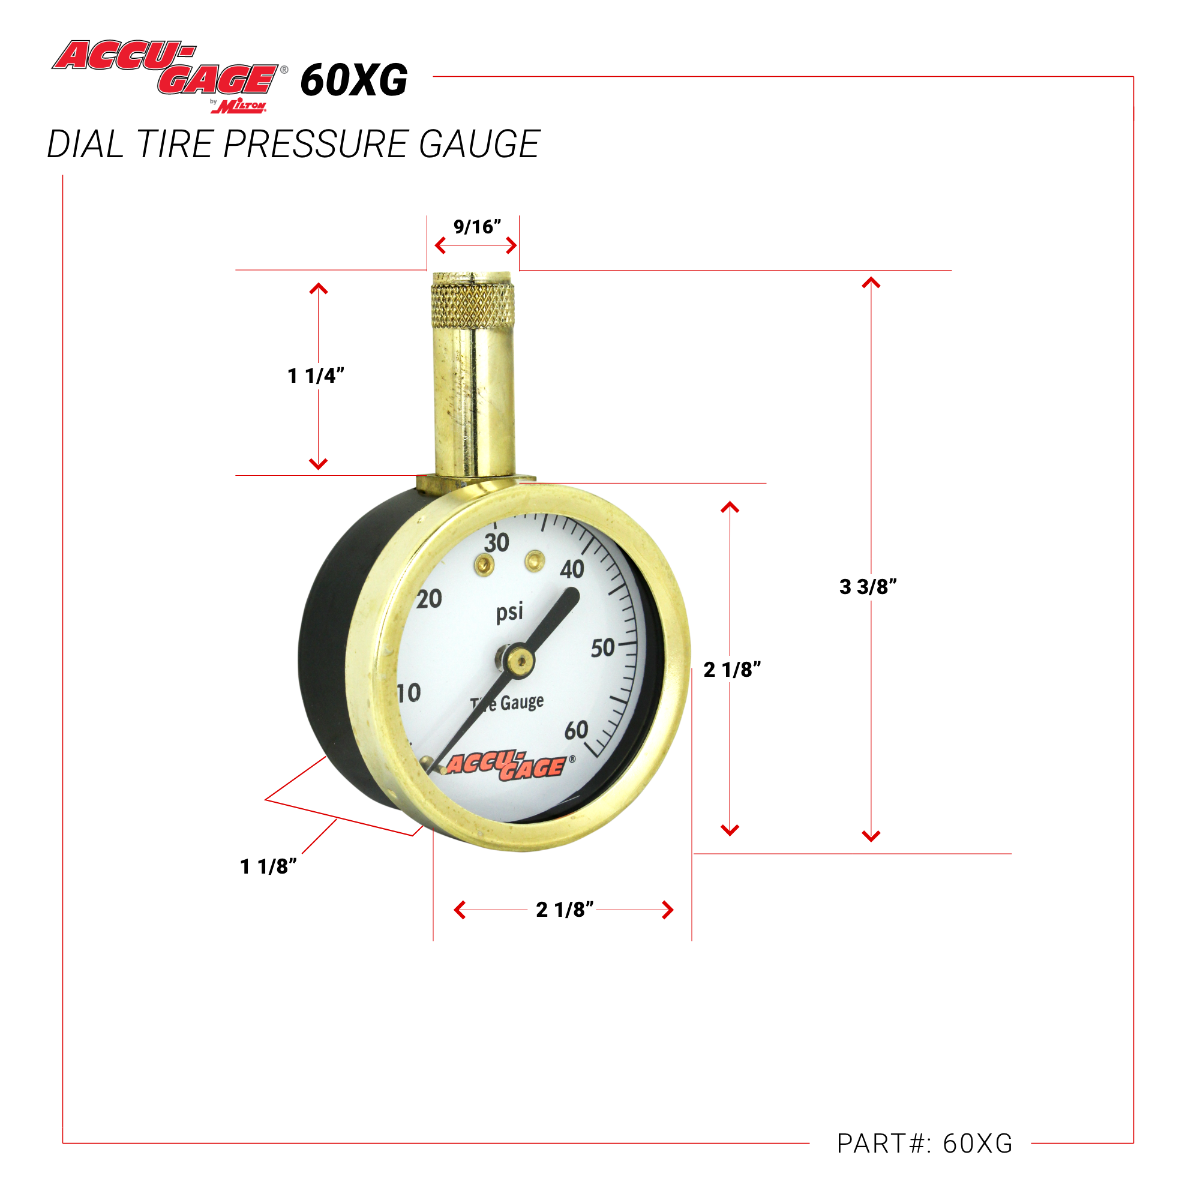 ACCU-GAGE® by Milton® Dial Tire Pressure Gauge with Straight Air Chuck - ANSI Certified for Motorcycle/Car/Truck Tires 0-60 PSI